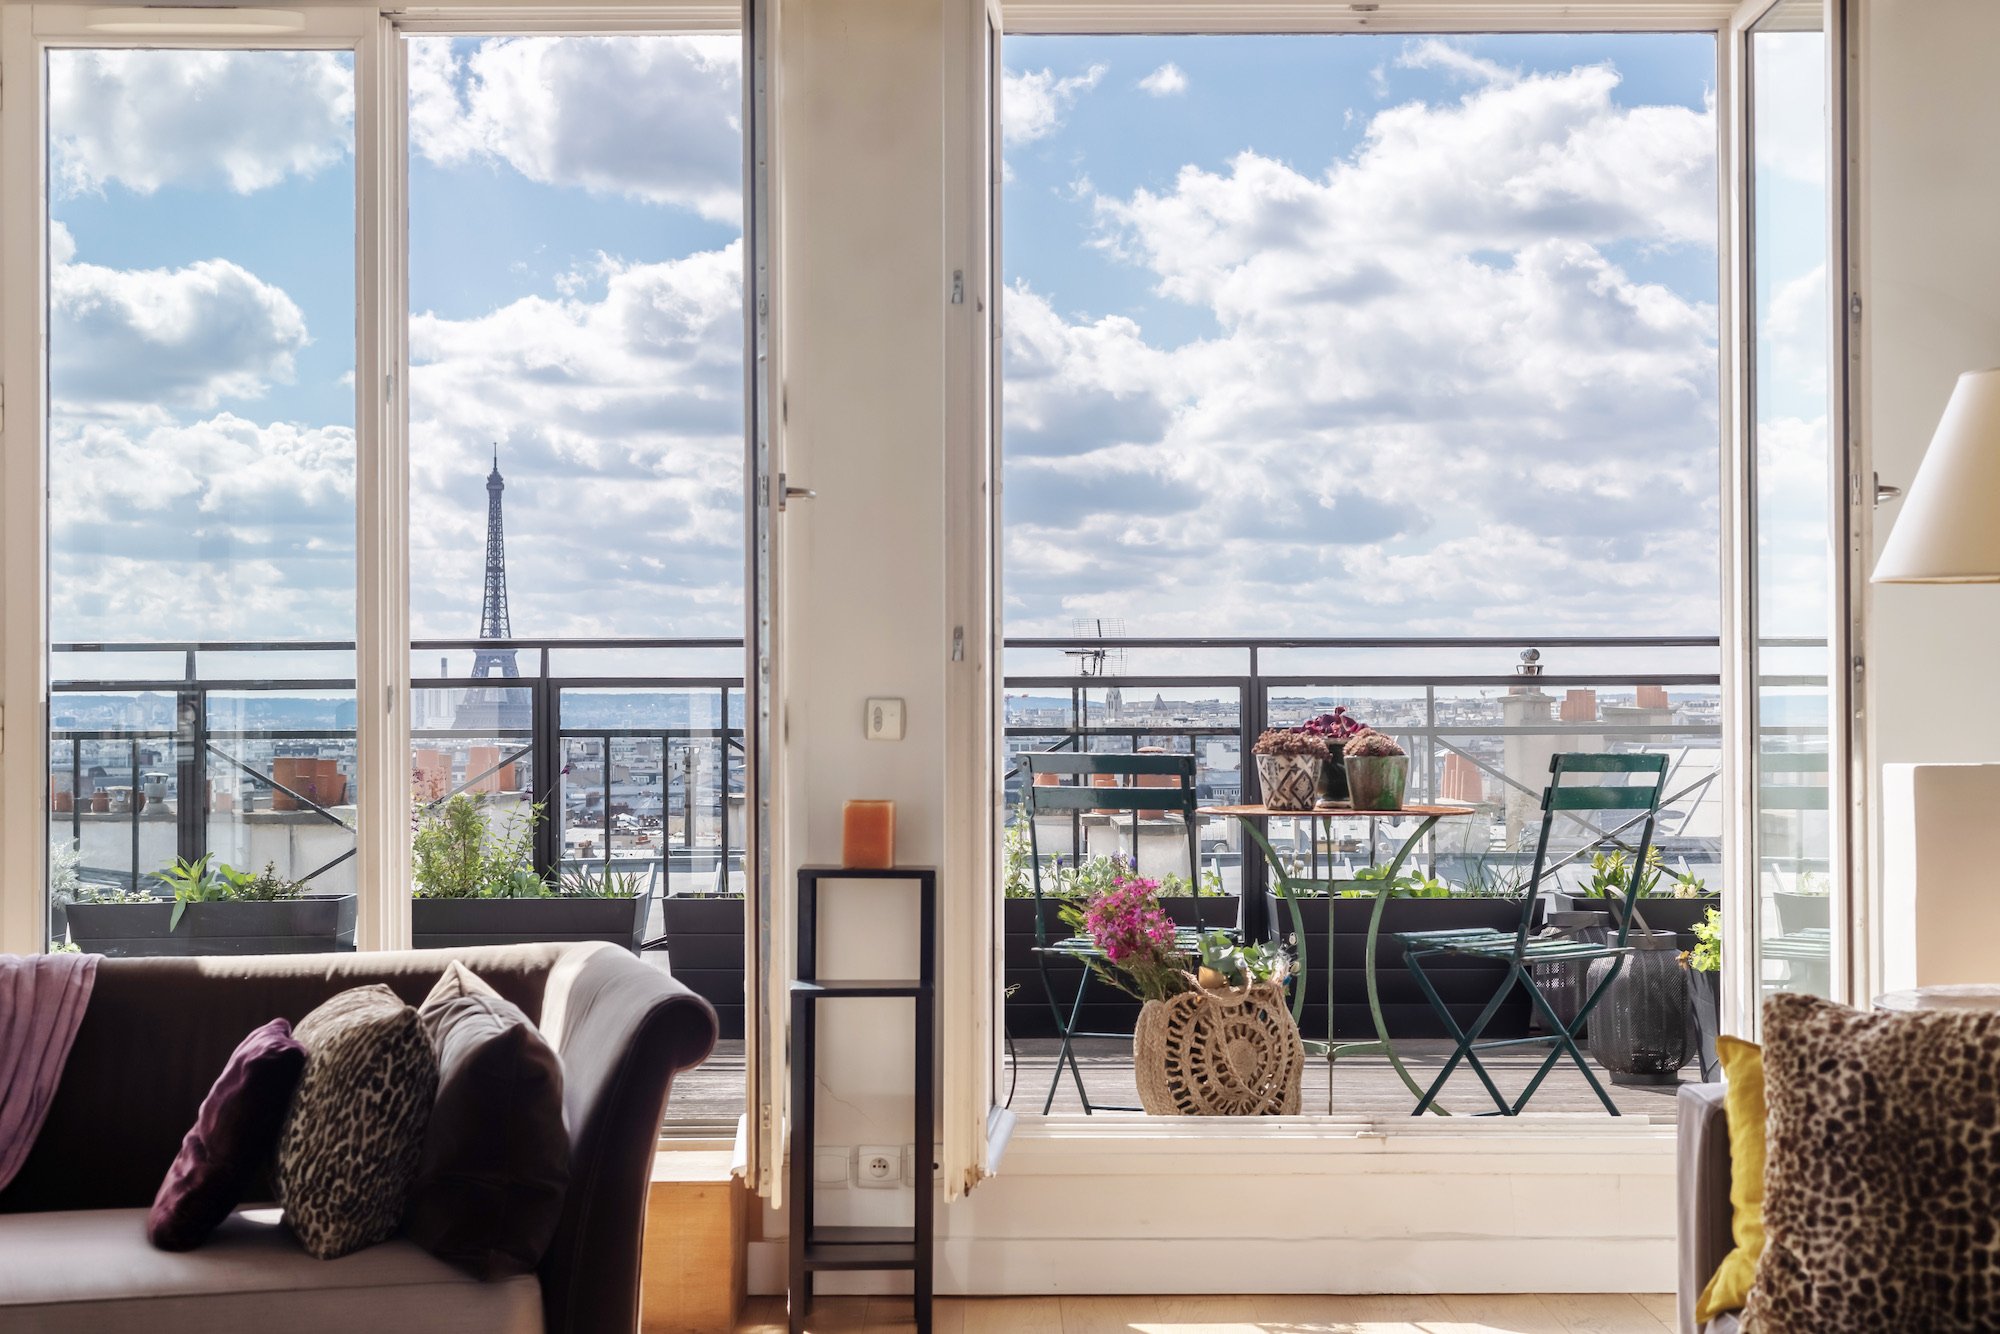 Luxury apartment and terrace in Paris overlooking the Eiffel Tower